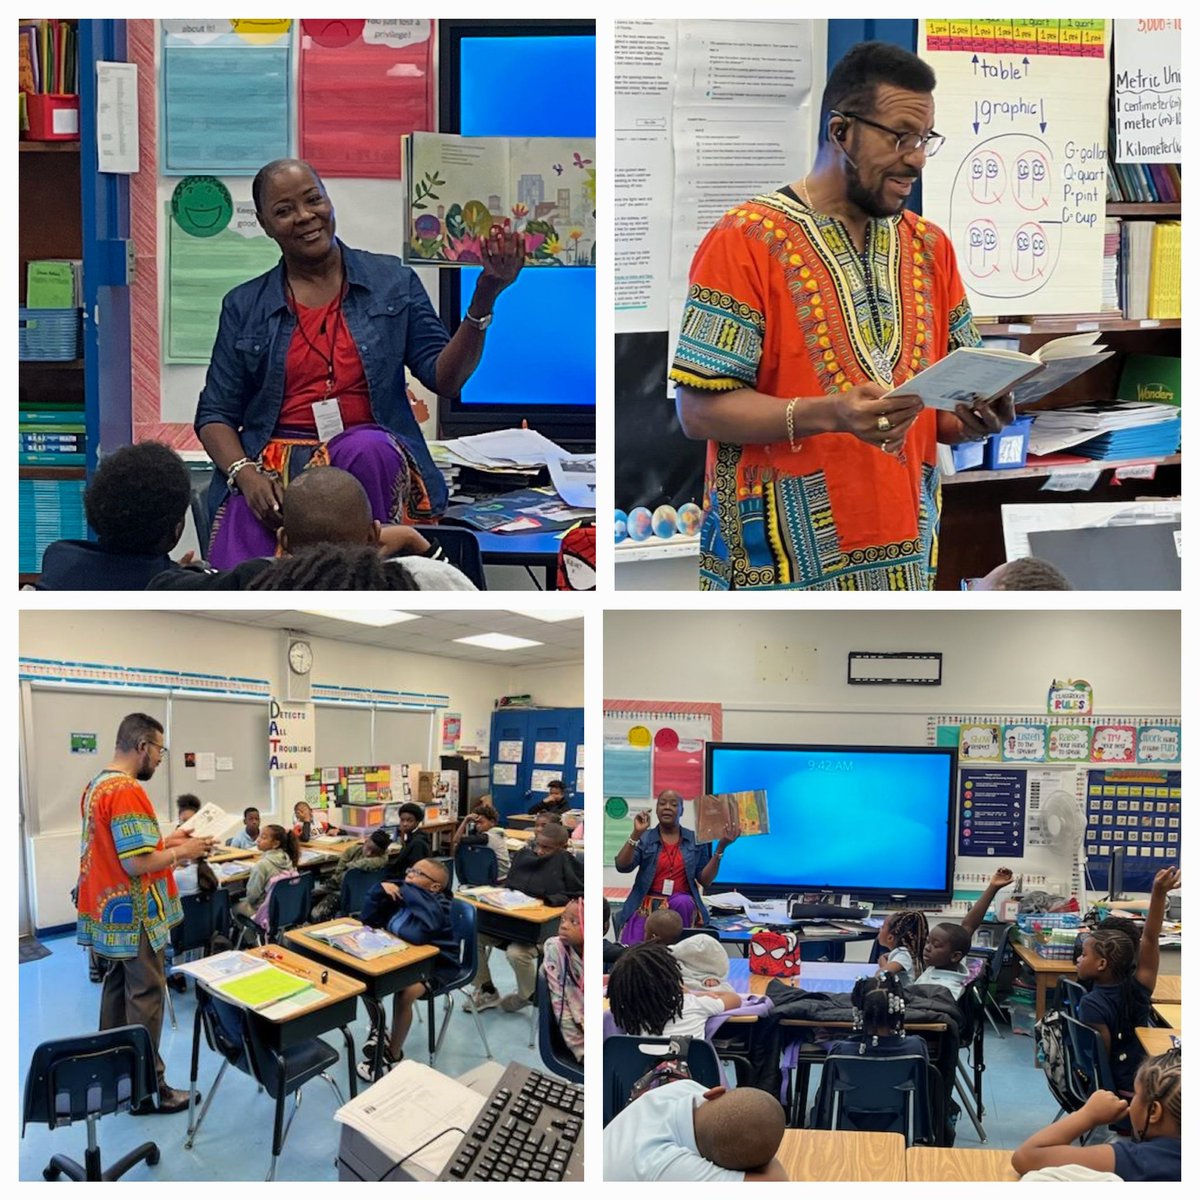 Myrtle Grove  African American  Read-In . Thank you for allowing us to share with your students.
#MyrtleGroveK8,#MiamiLearns ,#JeannieVerde